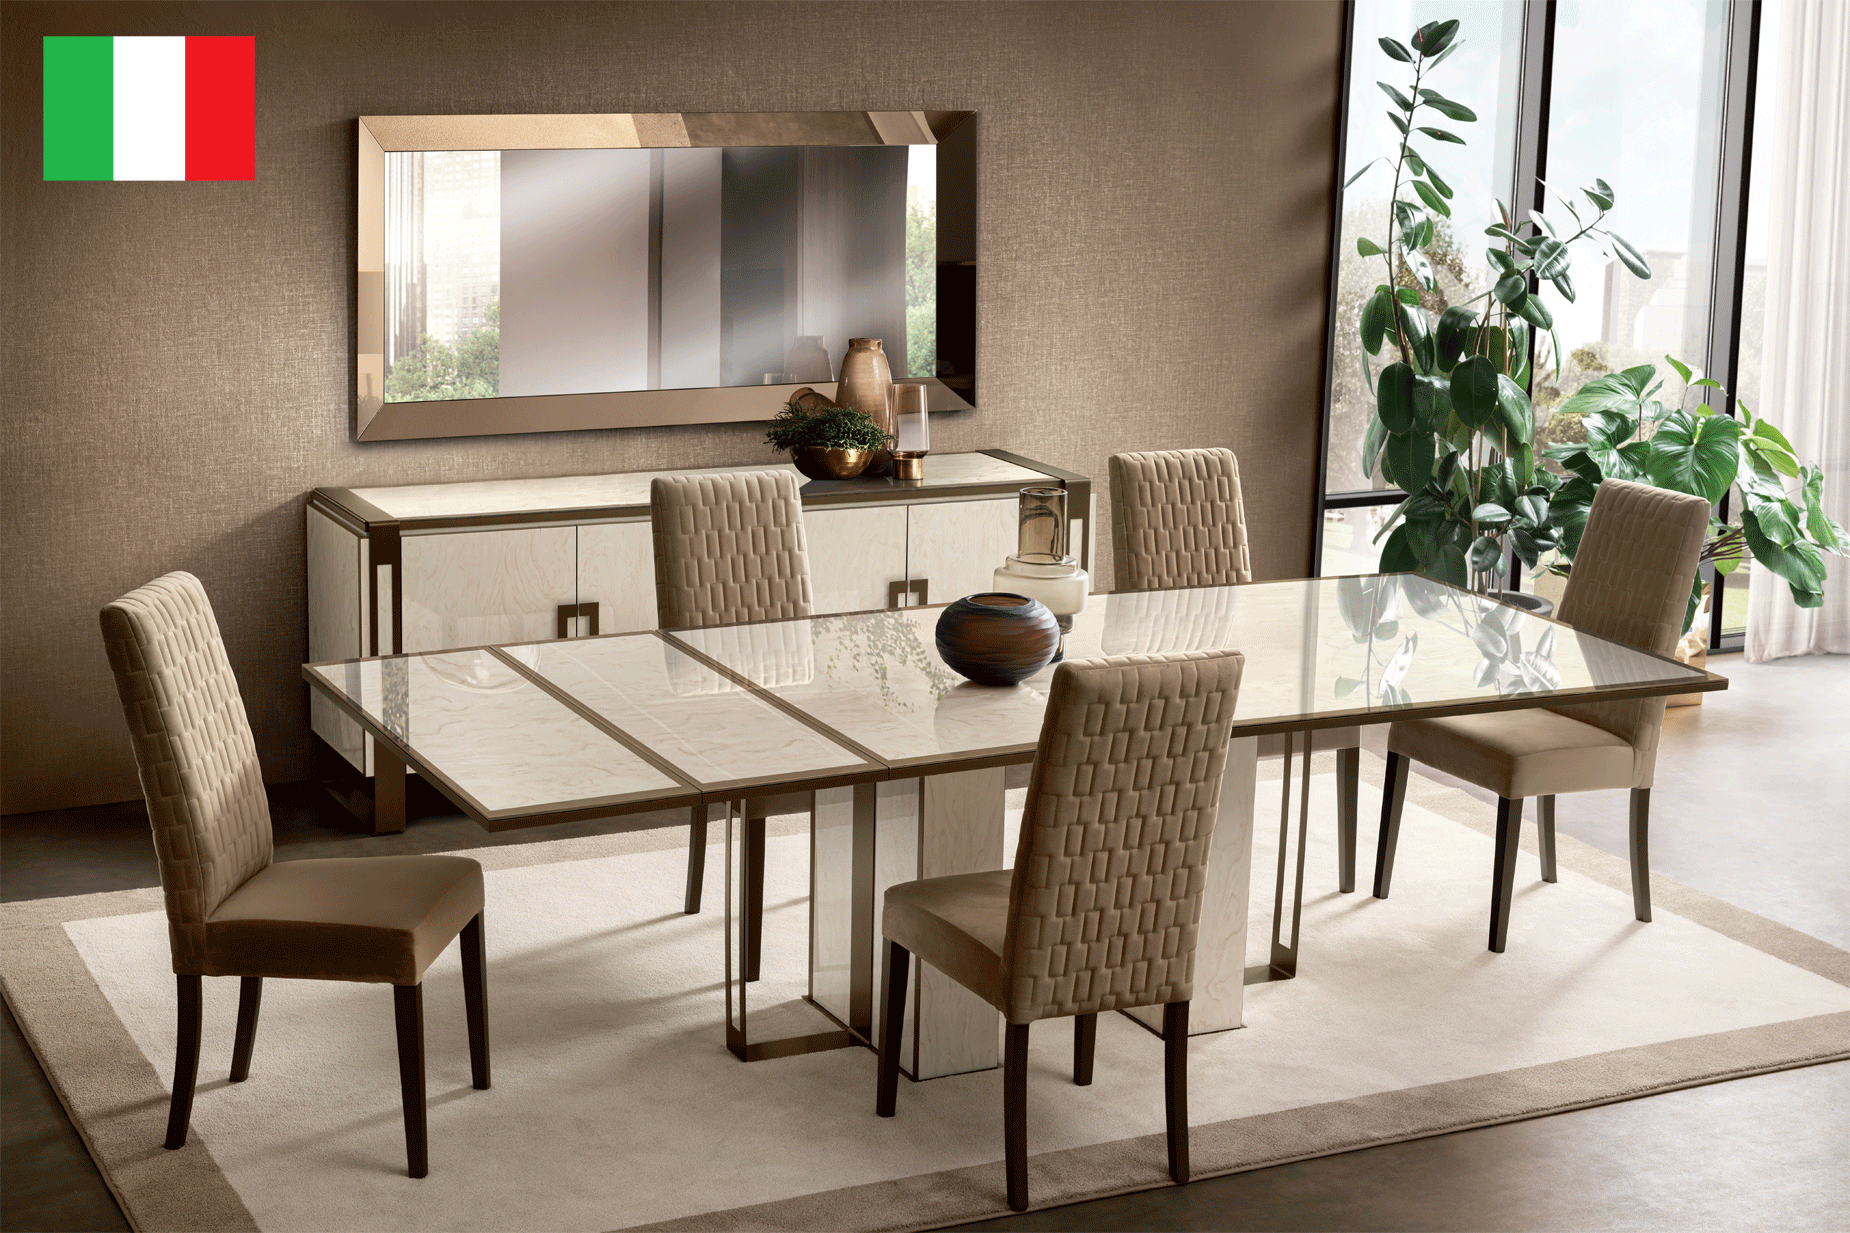 Brands Camel Gold Collection, Italy Poesia Dining Room